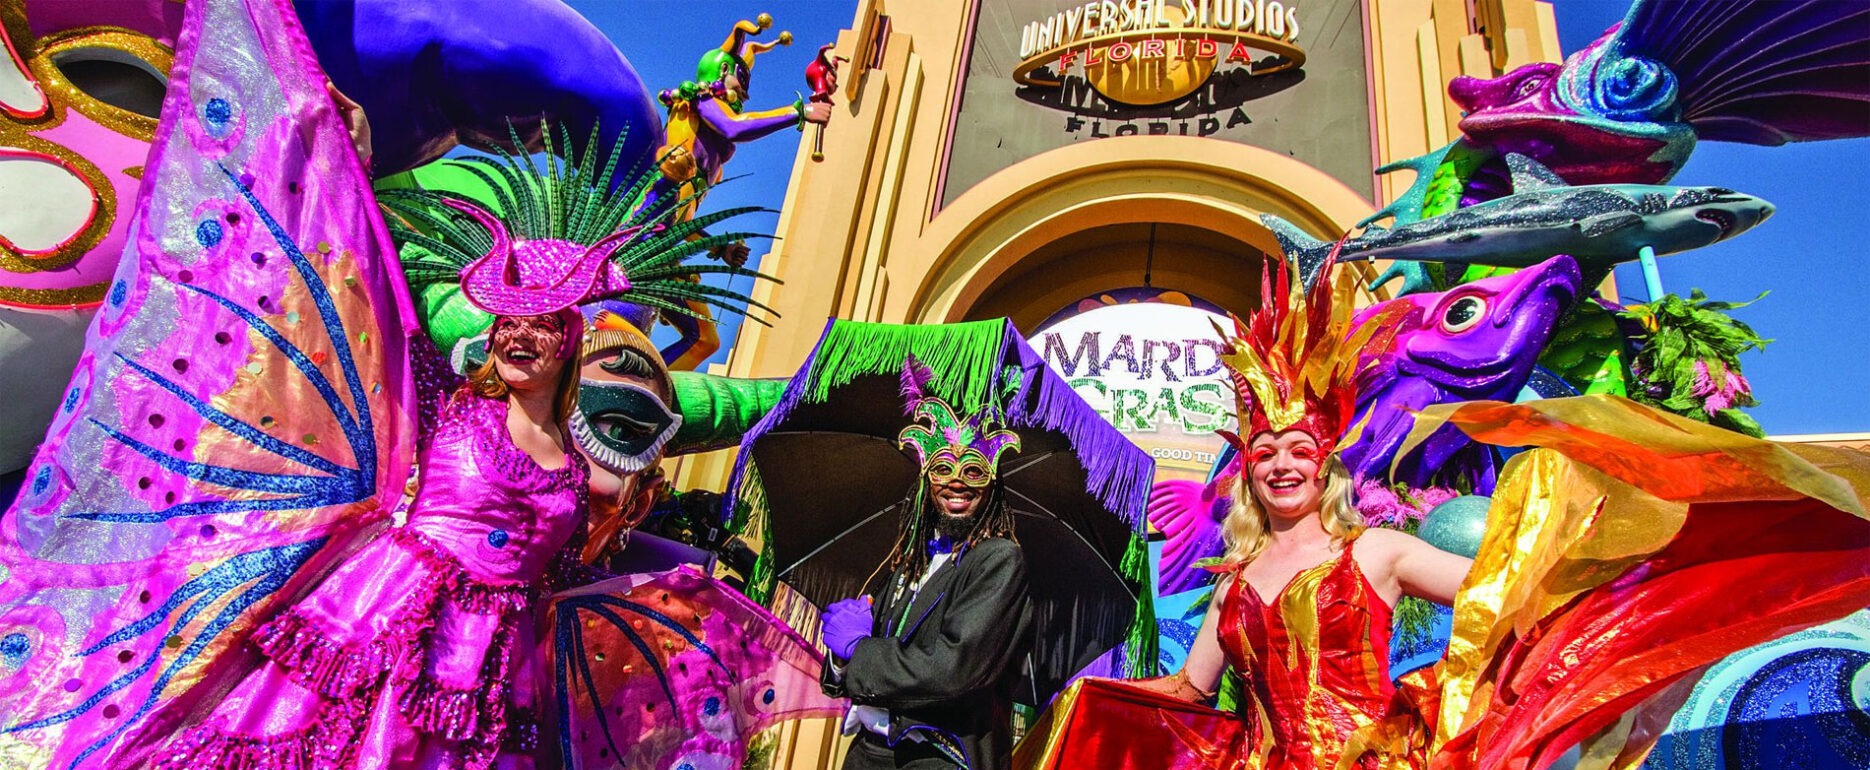 Orlando Special Events and What's Trending in Orlando's Theme Parks